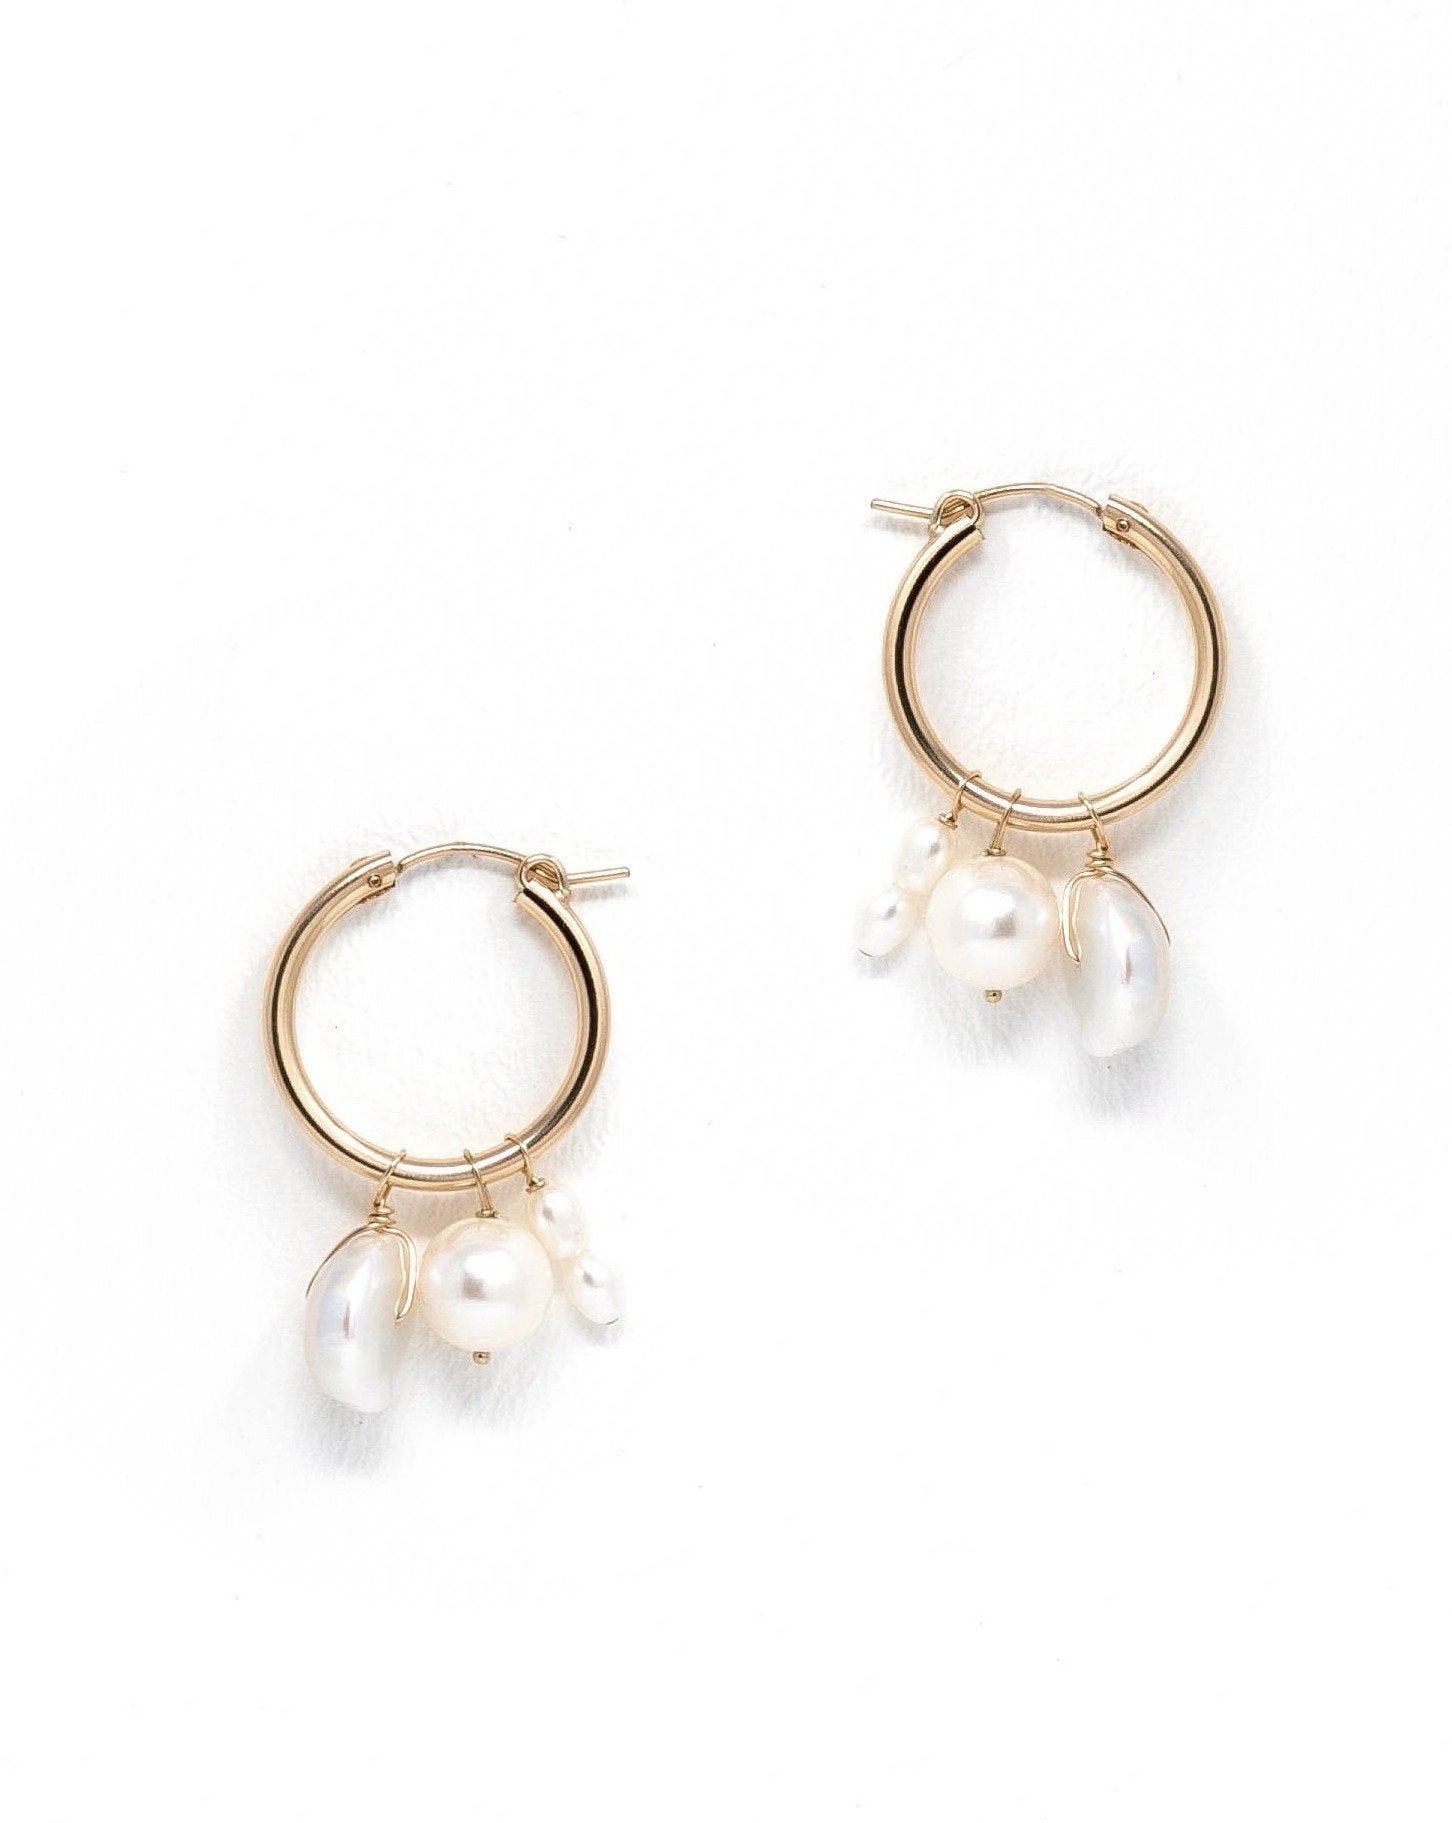 Nadia Hoop Earrings by KOZAKH. 22mm snap closure hoop earrings in 14K Gold Filled, featuring 3-4mm rice Pearls, a 7mm potato Pearl, and a 8mm Keshi Pearl.